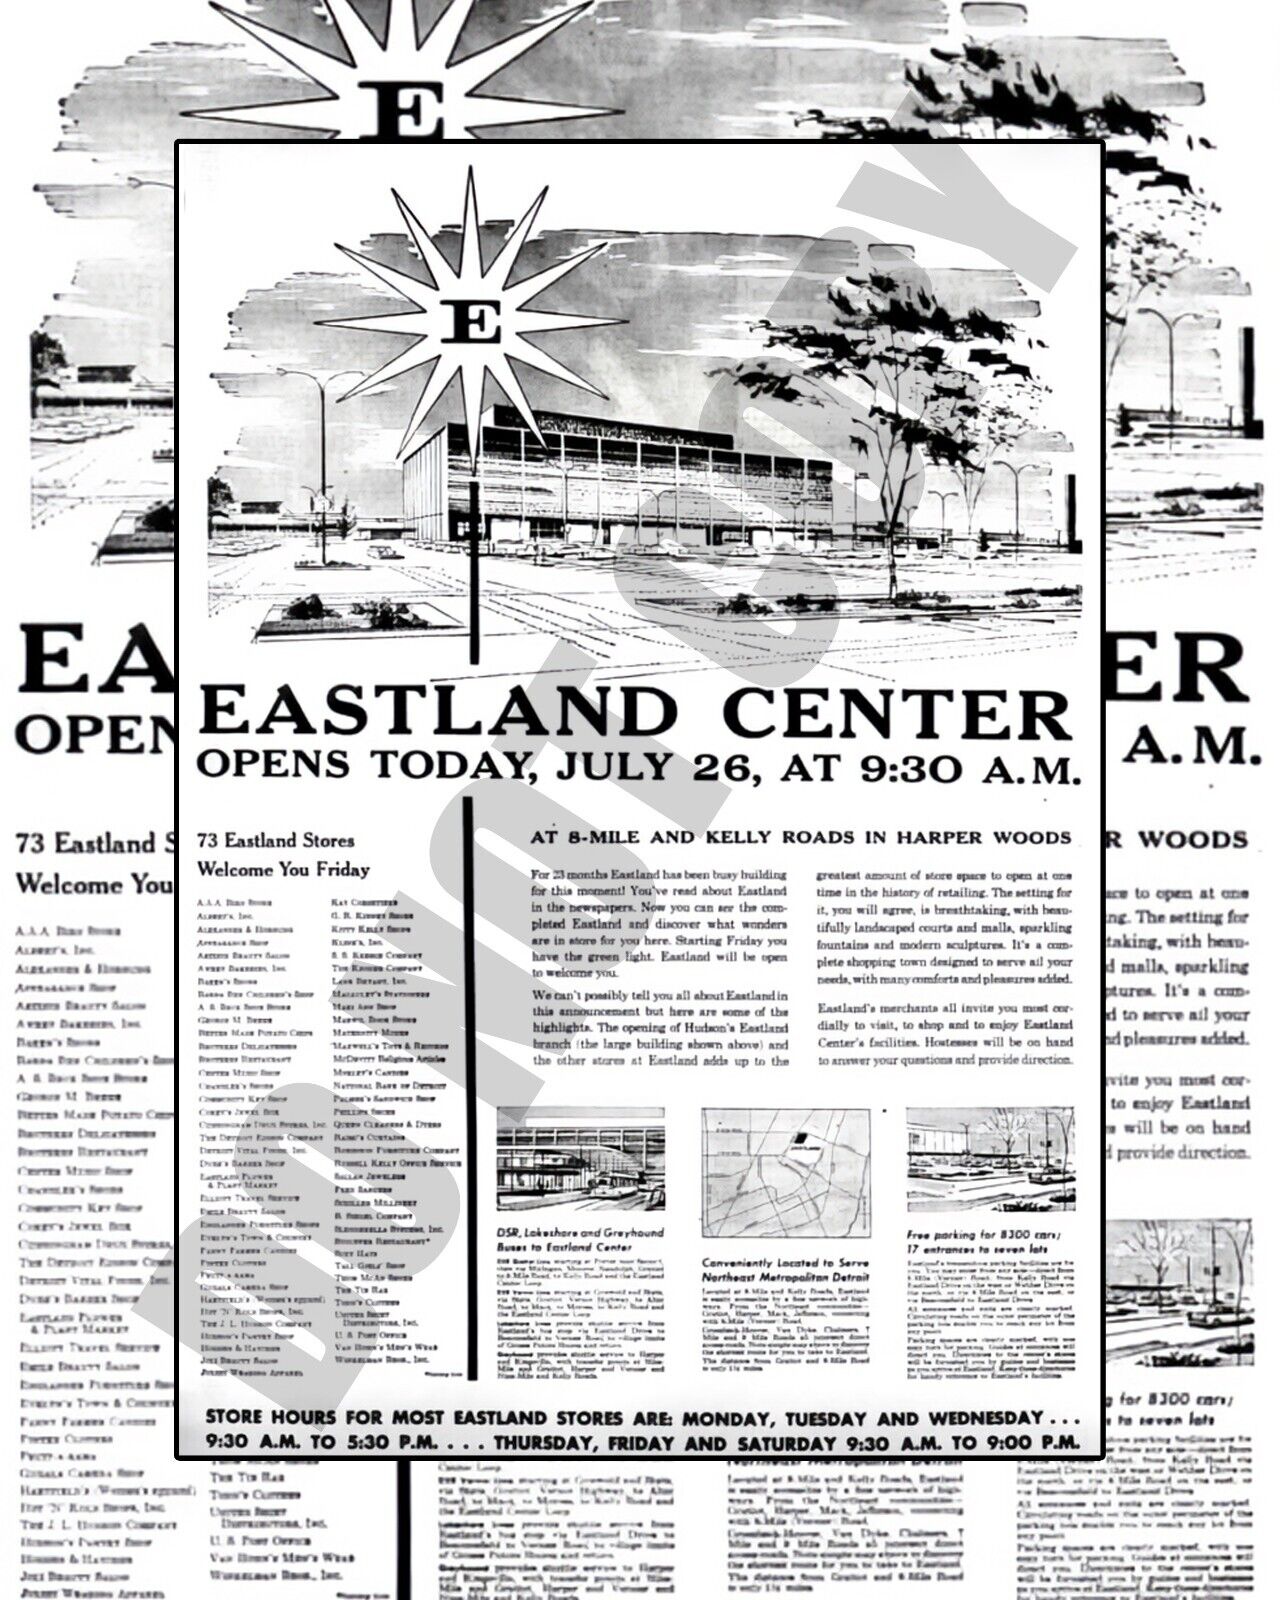 July 1957 Eastland Shopping Center In Harper Woods Newspaper Ad 8x10 Photo